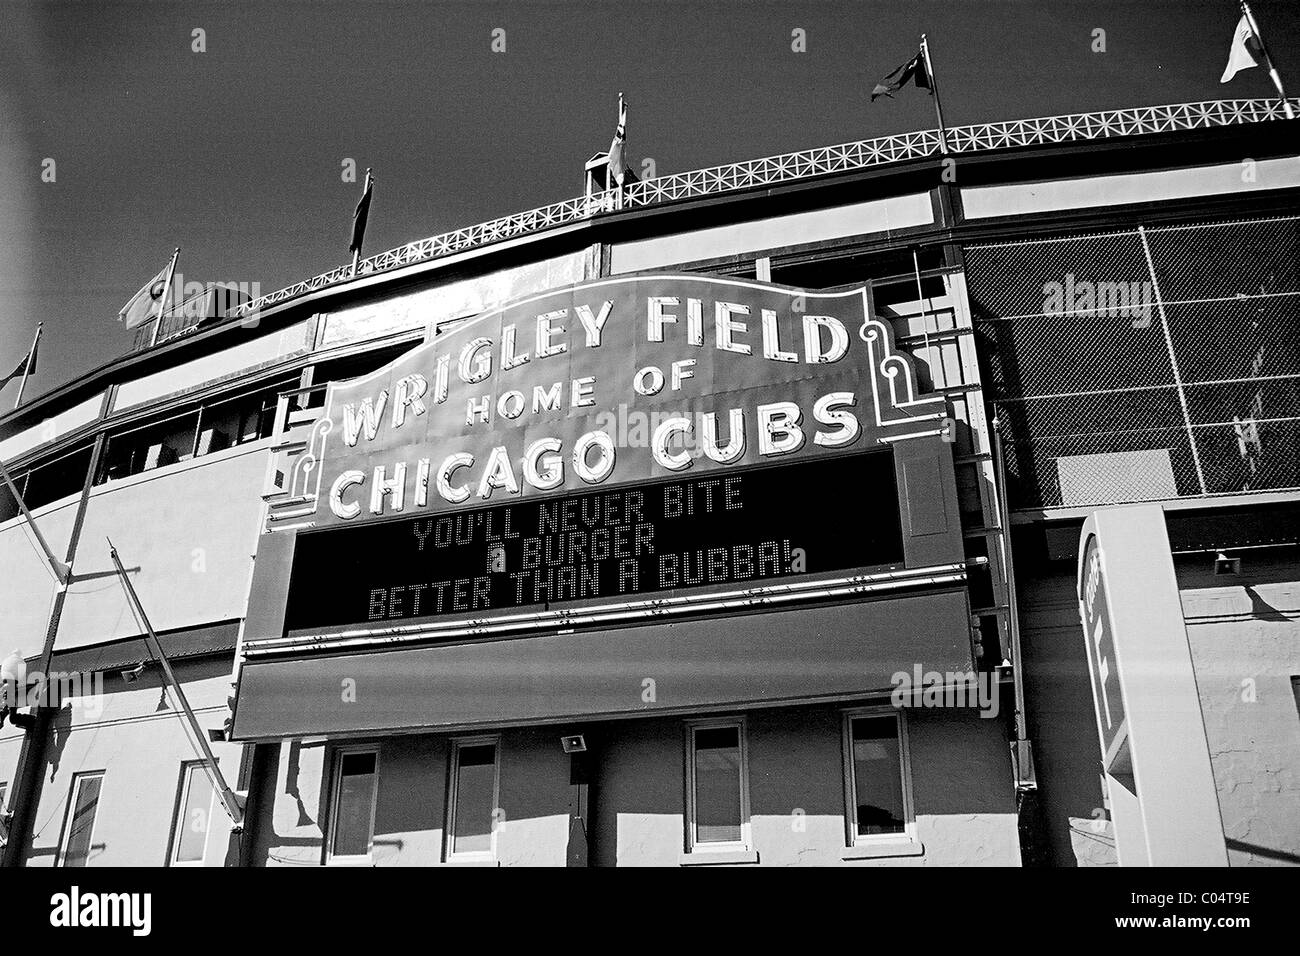 Wrigley Field, home of the Chicago Cubs, in Chicago, Illinois. Stock Photo